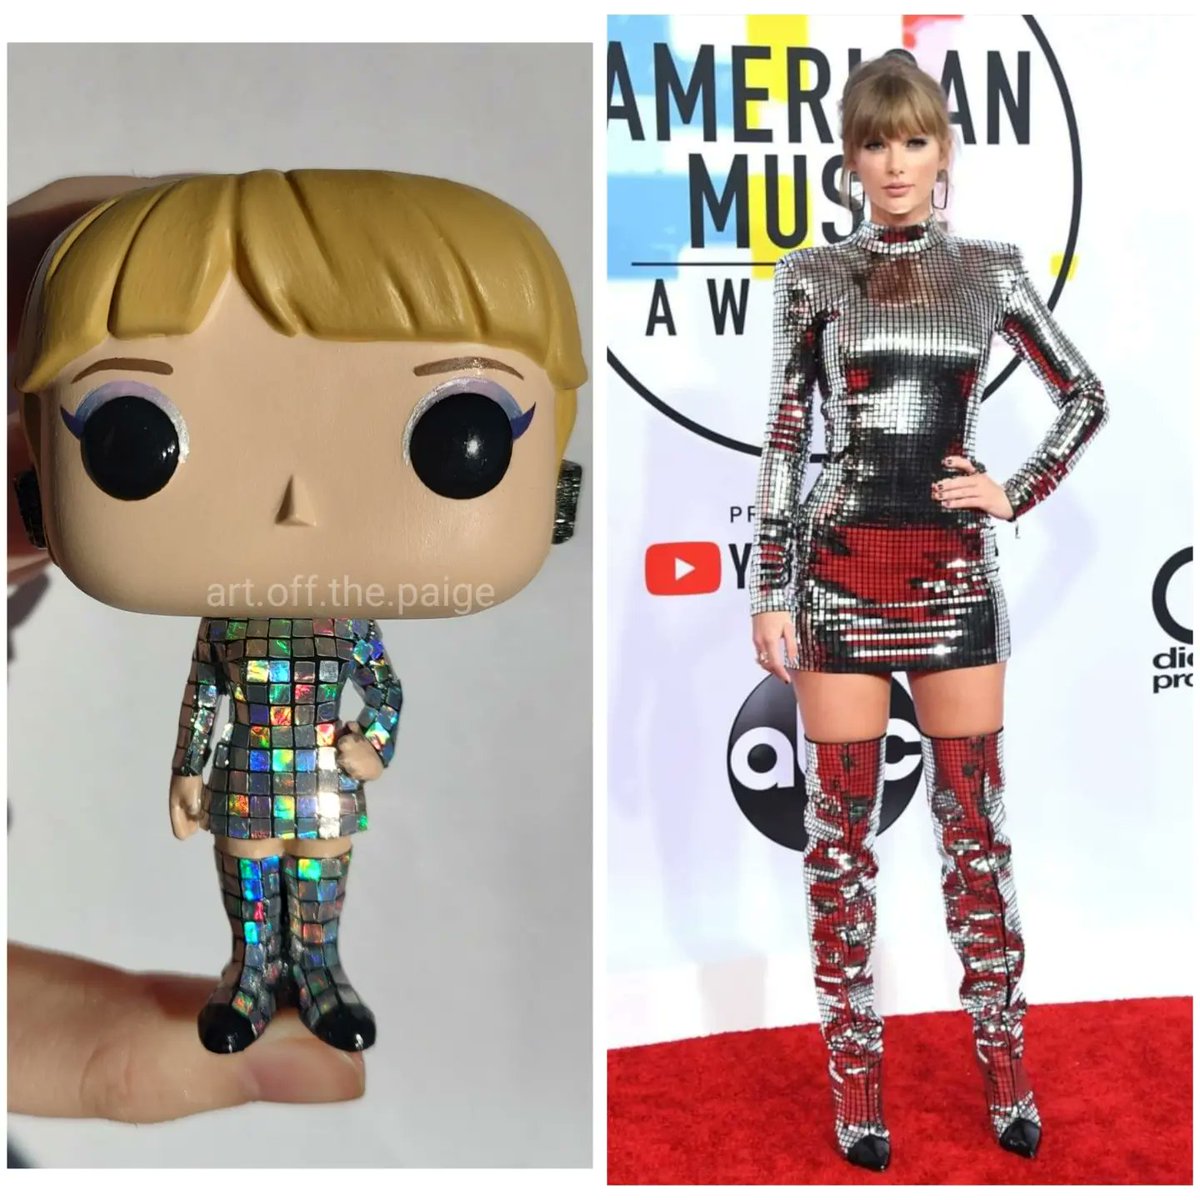 art.off.the.paige on Instagram: The Eras Tour - Speak Now - Custom Taylor  Swift Funko Pop made by ME! 💚💛💜❤️🩵🖤🩷🩶🤎💙 . DM for inquiries 🥰 . # taylor #taylorswift #taylorsversion #swiftie #swifties #gift #gifts #